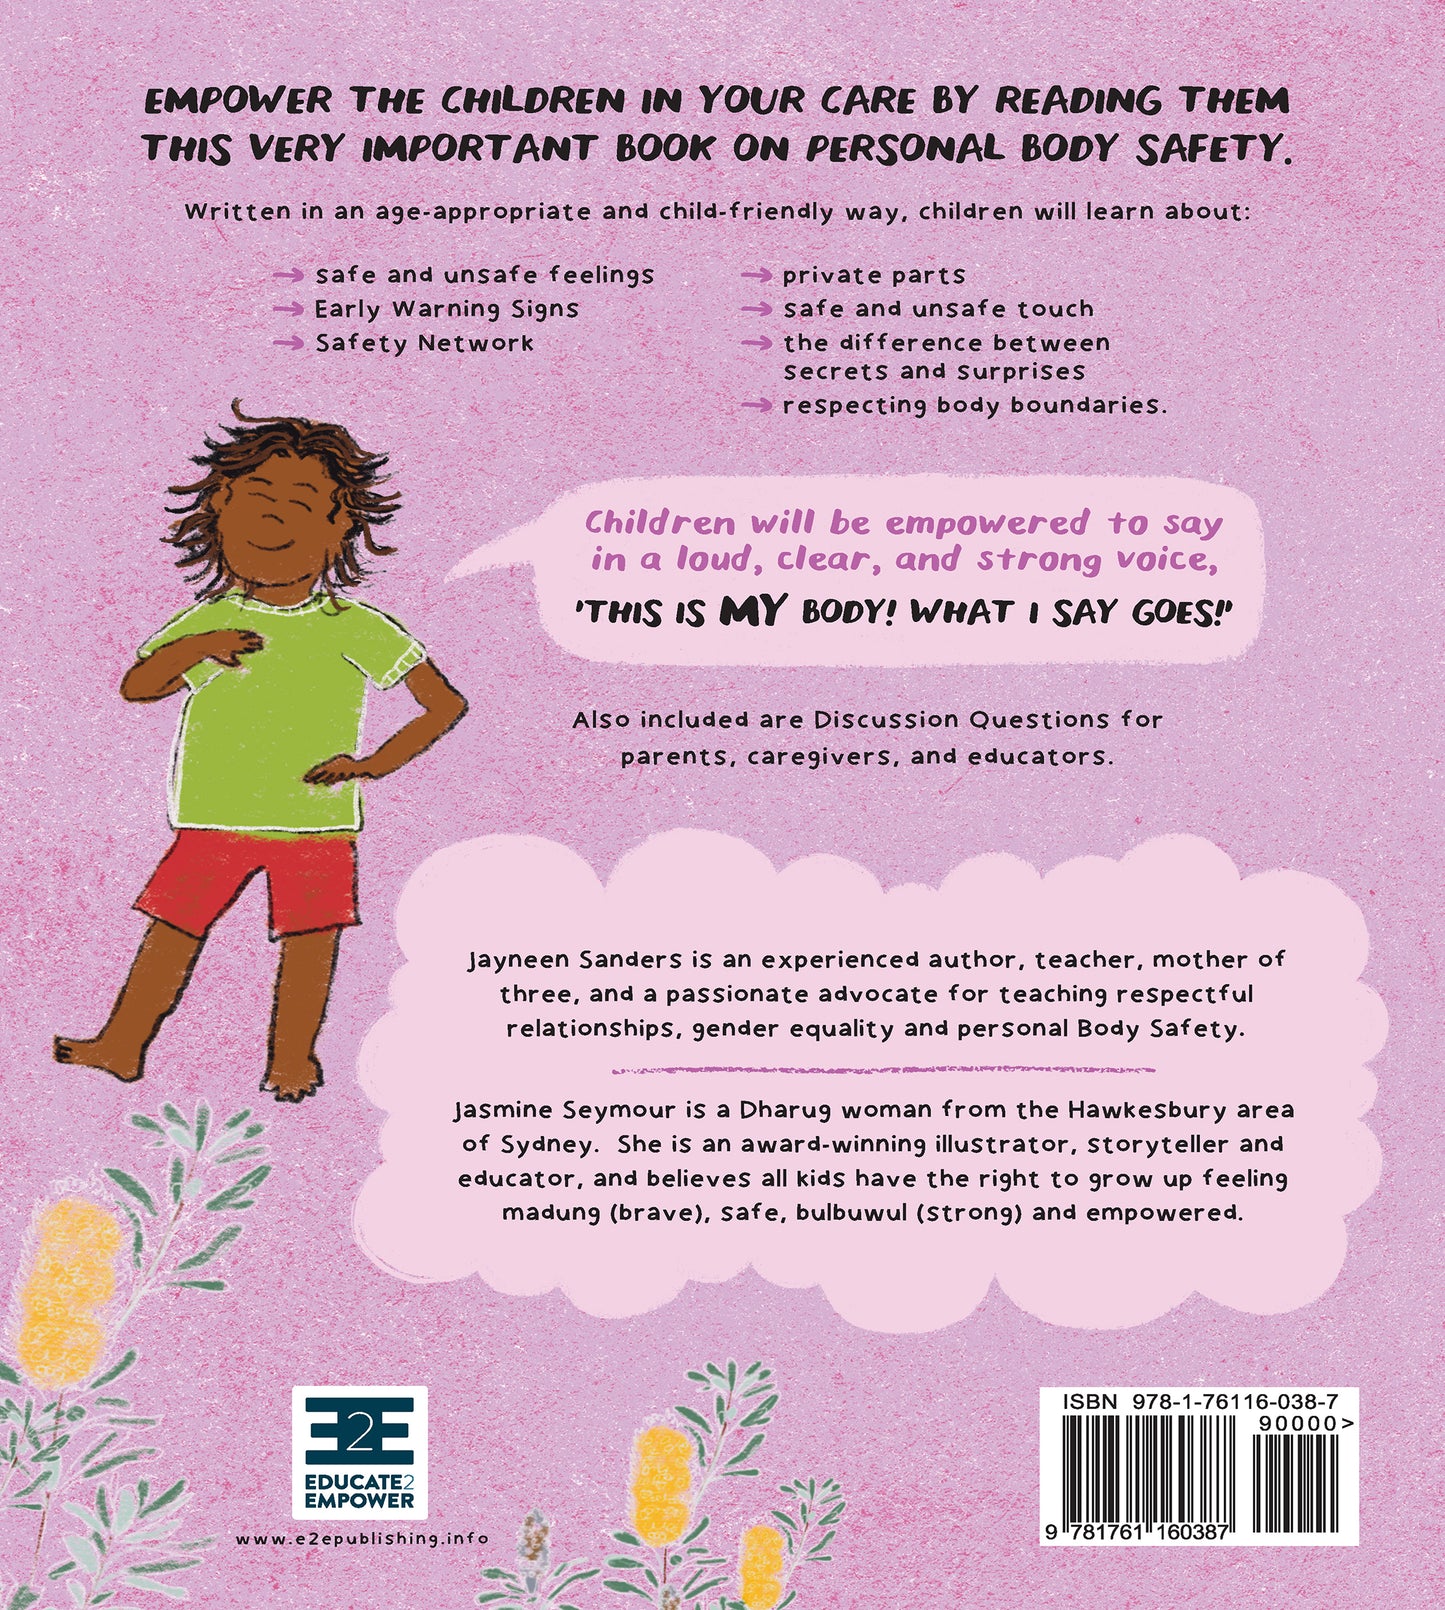 The back cover of the book 'My Body! what I Say Goes! Kiah's Edition. ' by Jayneen Sanders